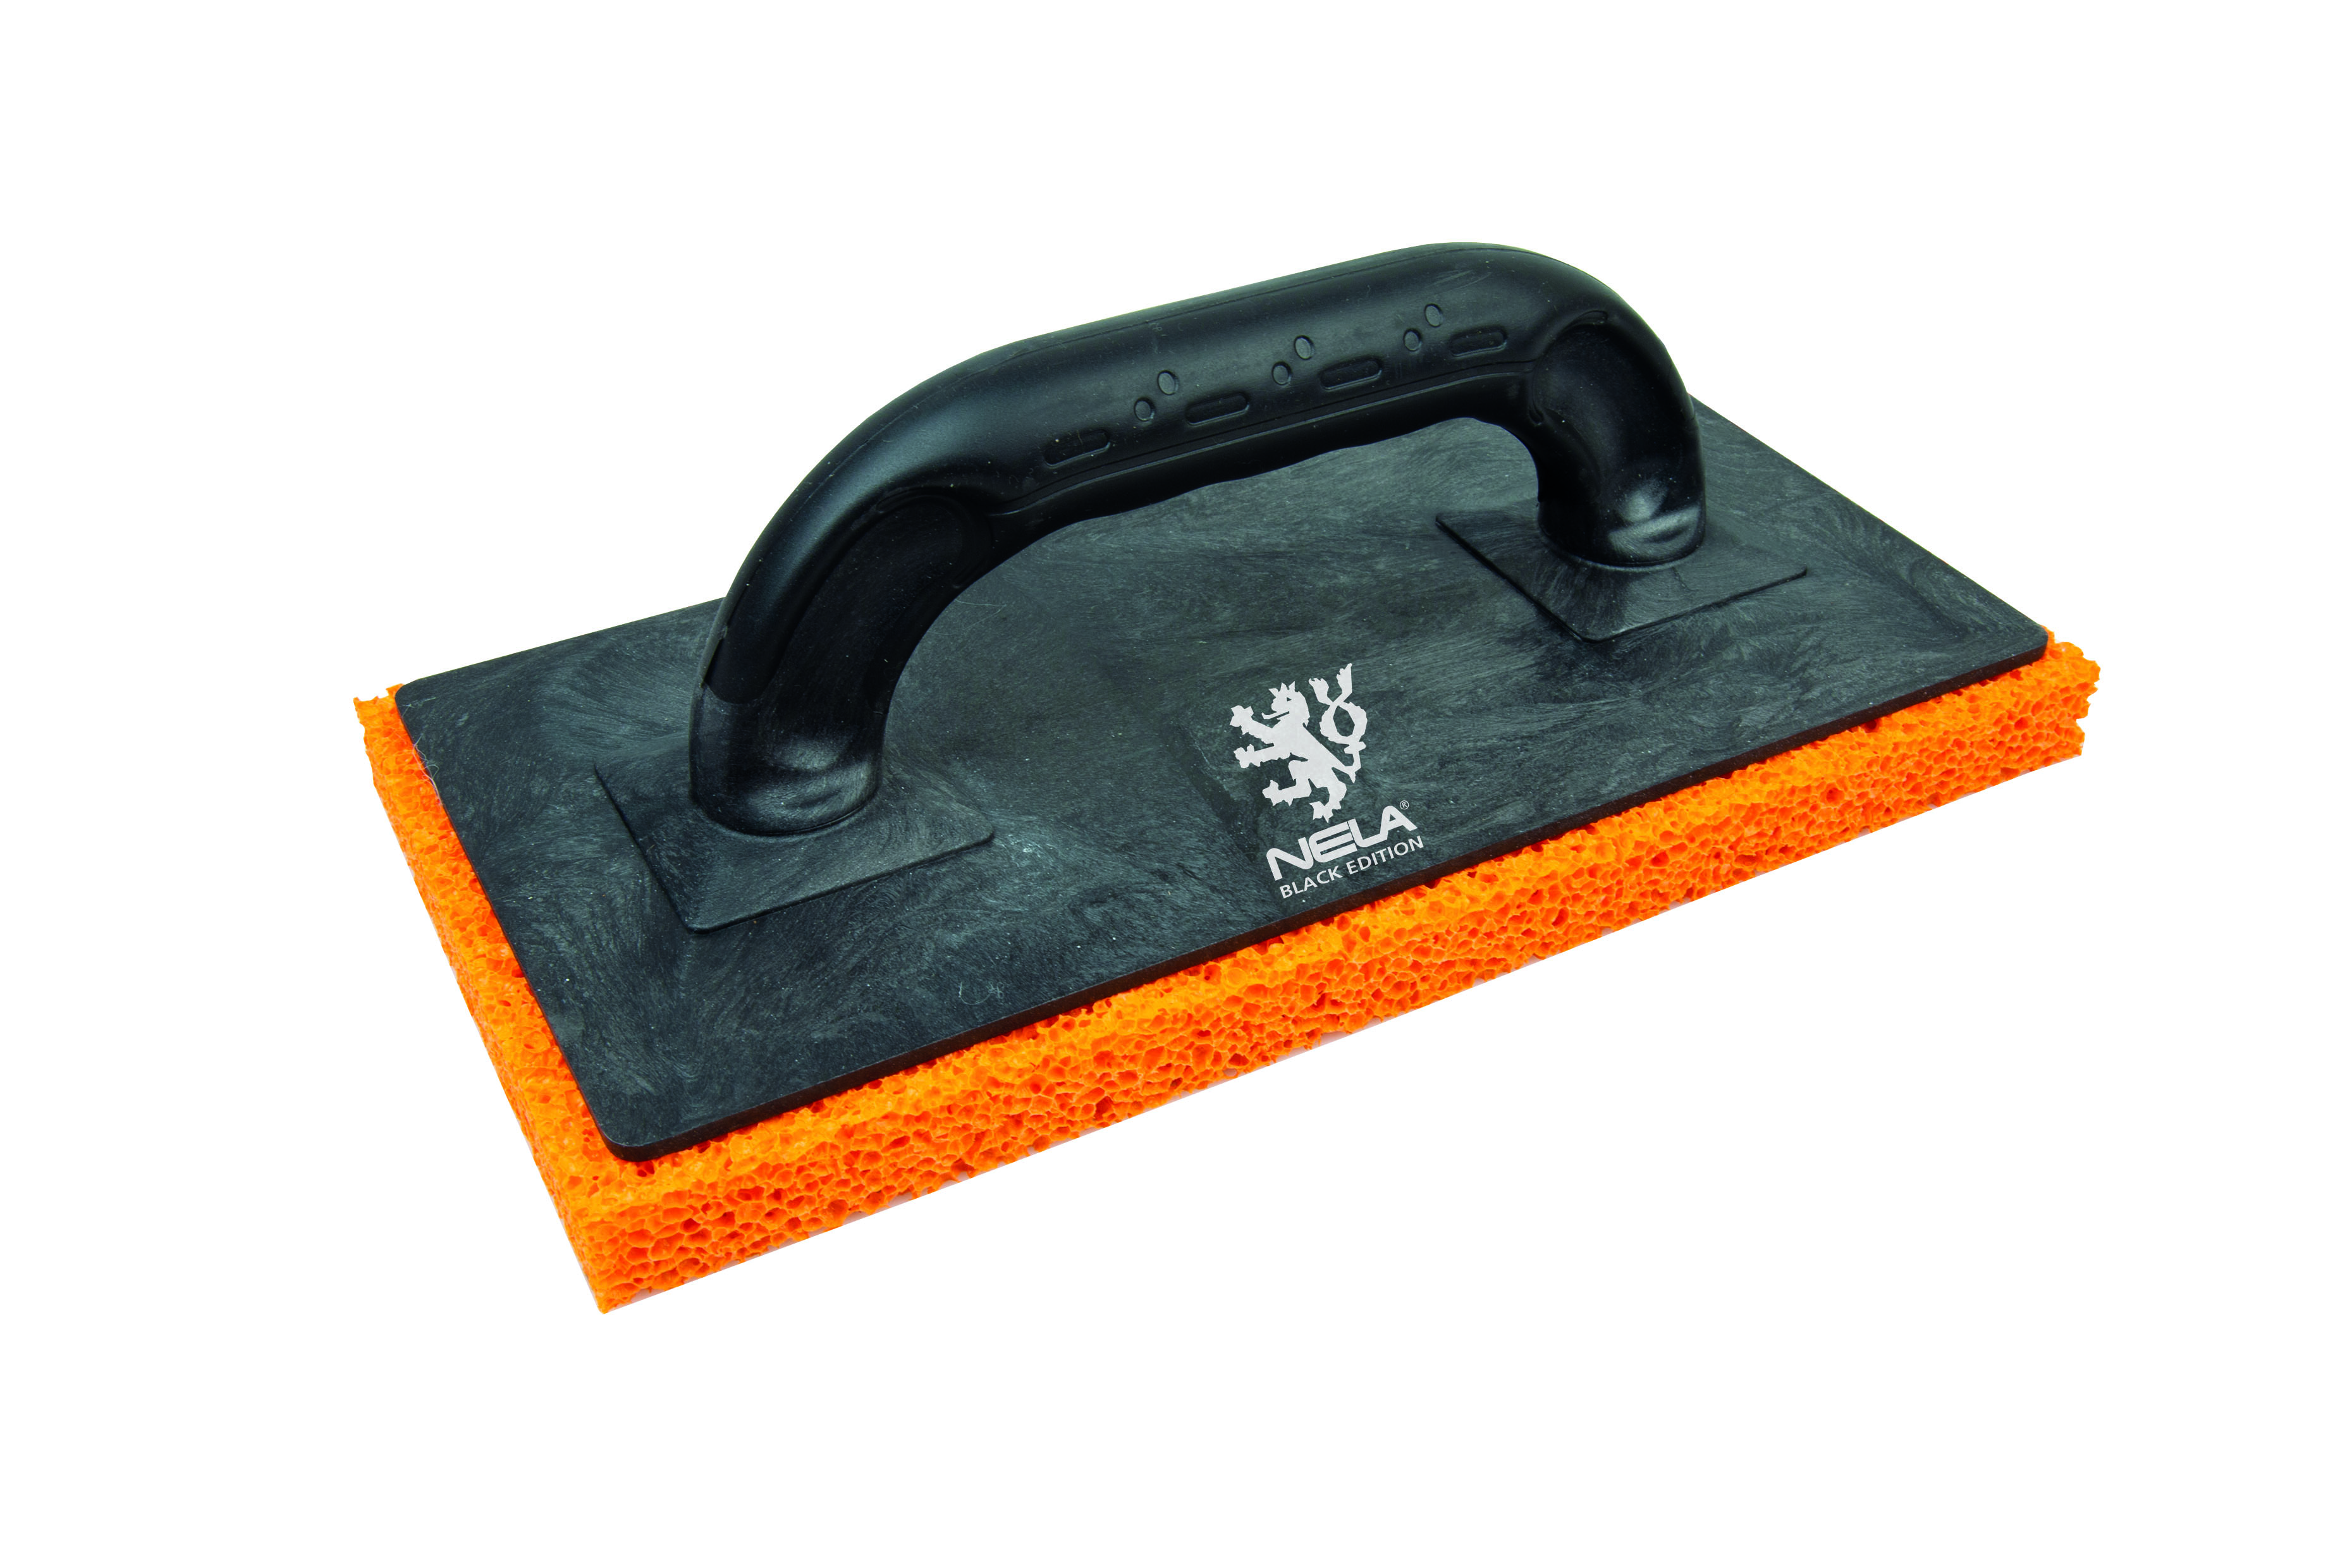 Black Edition Sponge Float with red rubber - Rough